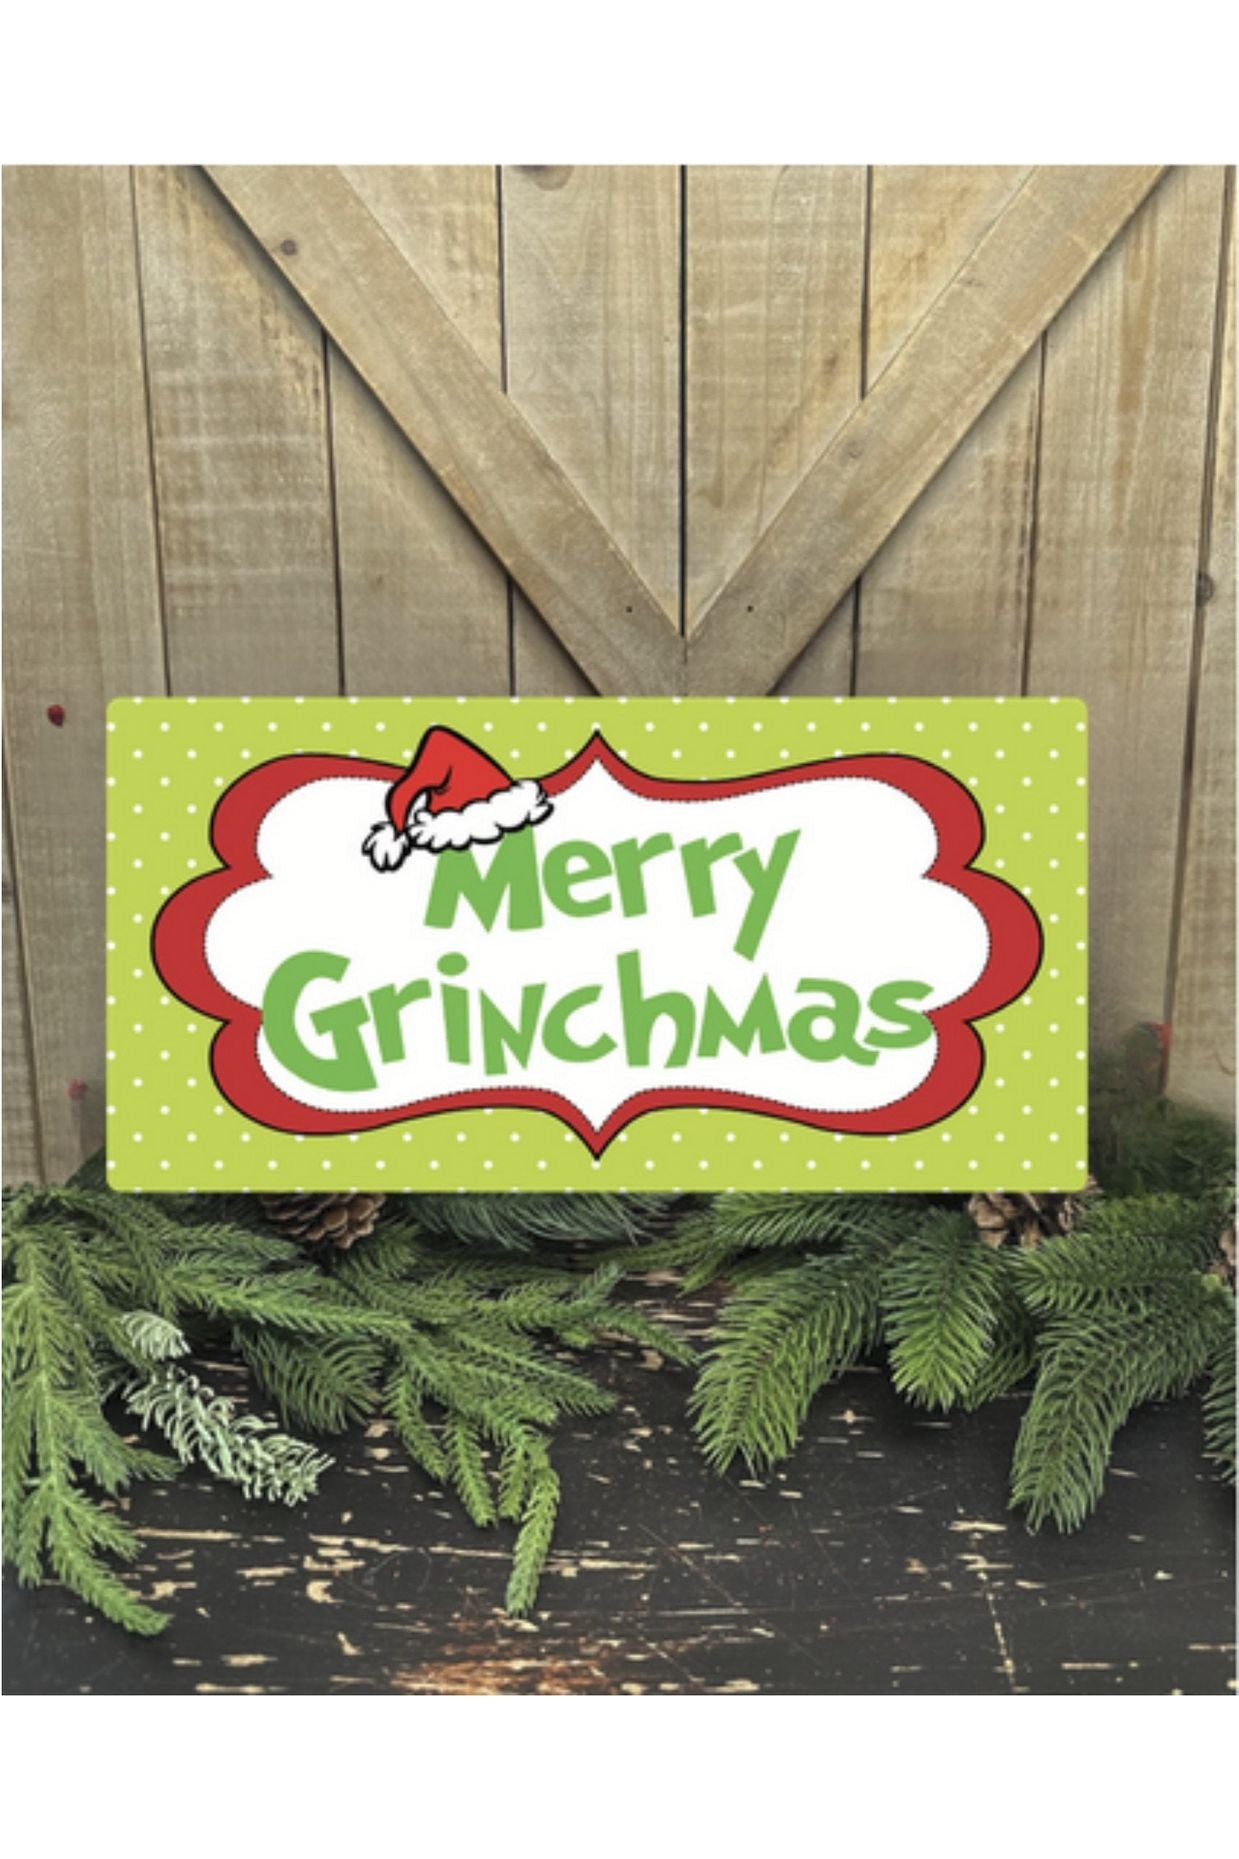 Merry Grinchmas Sign - Wreath Enhancement - Michelle's aDOORable Creations - Signature Signs